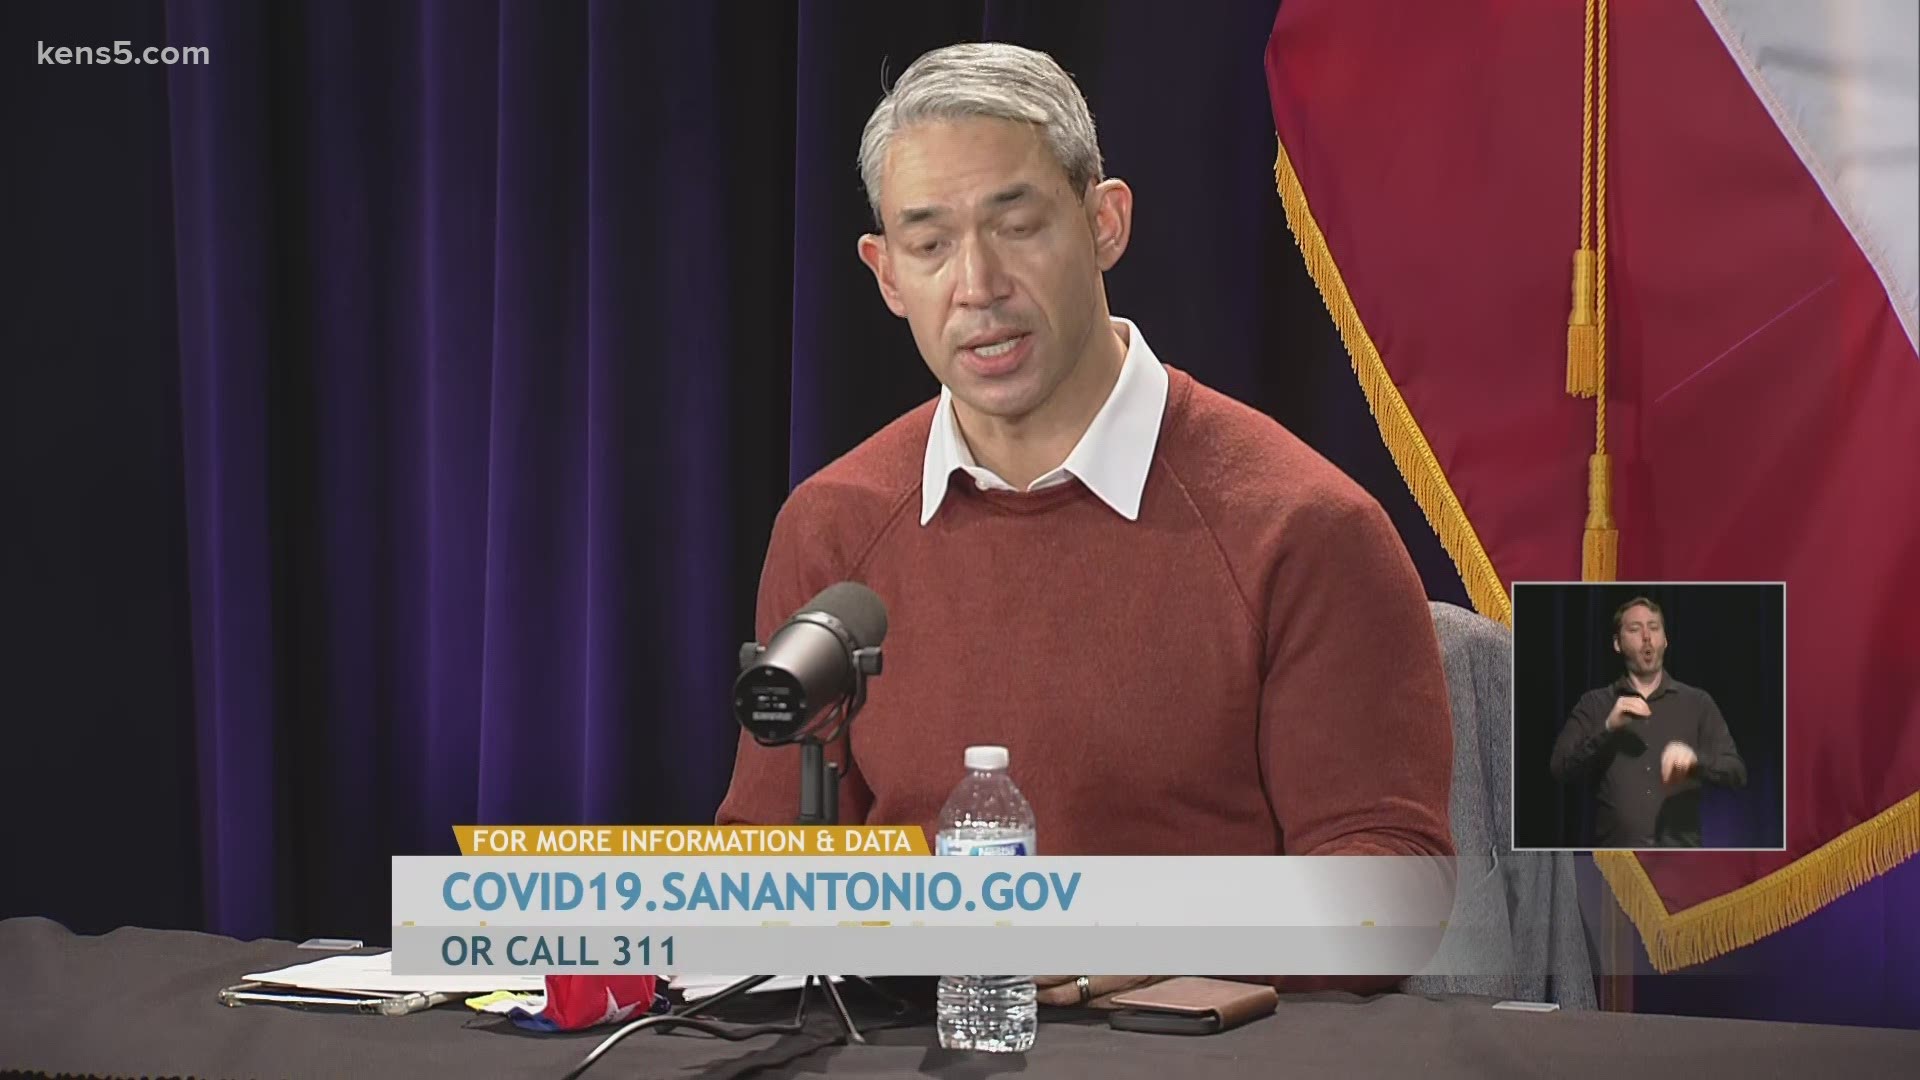 Mayor Nirenberg reported 1,585 new coronavirus cases, bringing the total to 135,104. One new death was also reported, raising the death toll to 1,859.